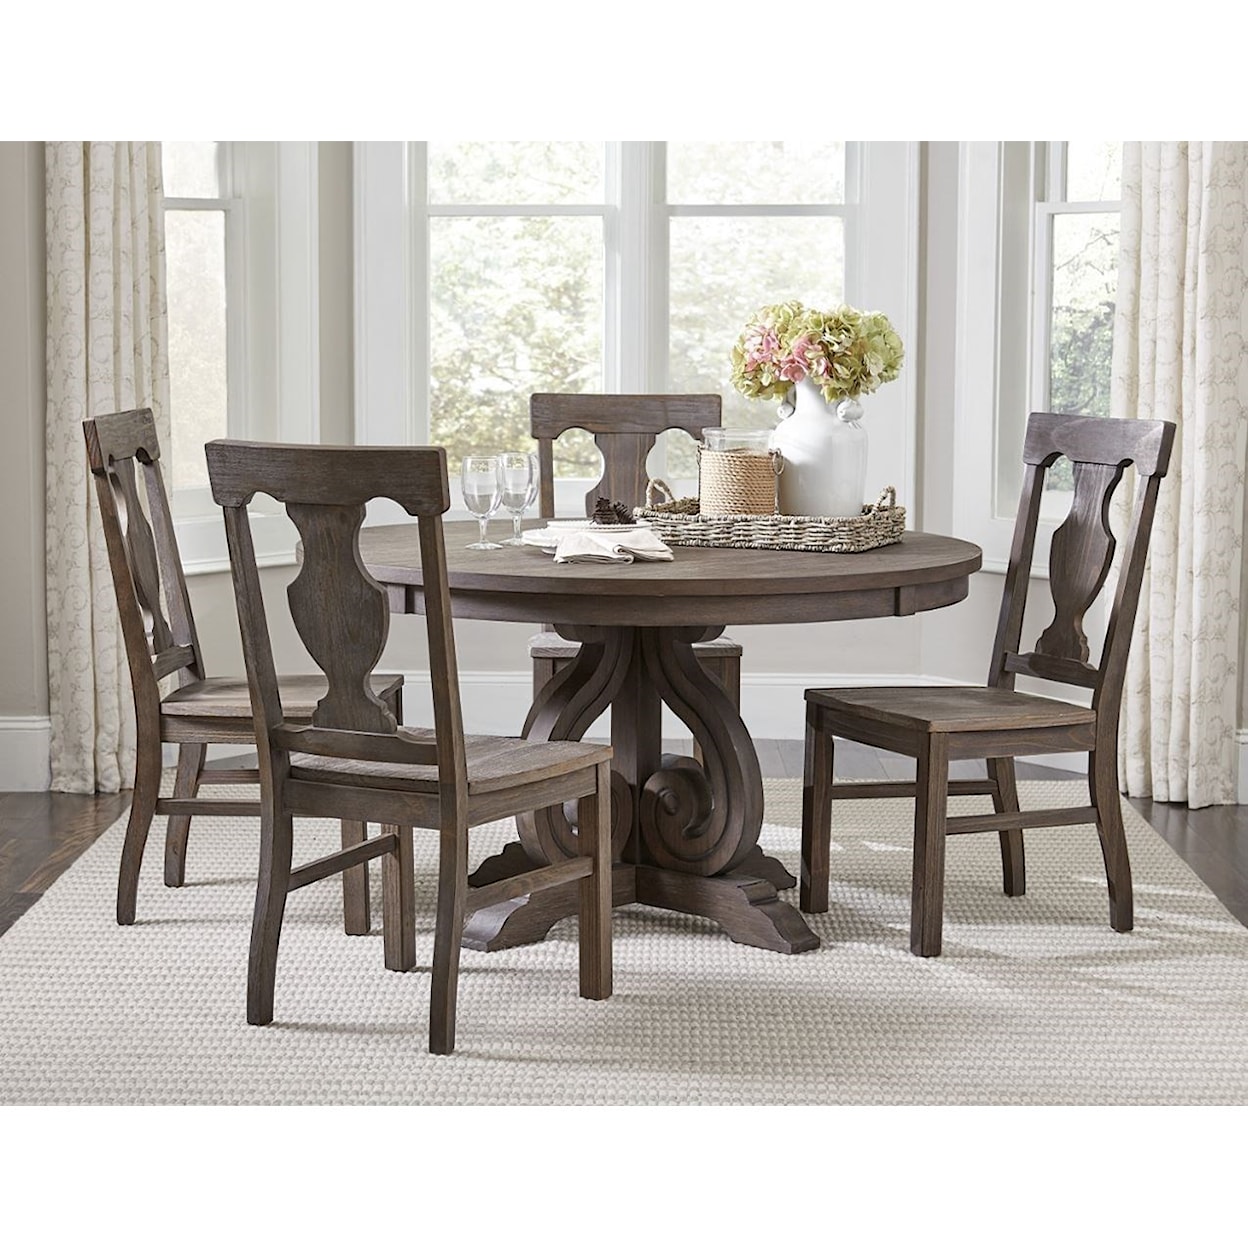 Homelegance Toulon 5-Piece Table and Chair Set